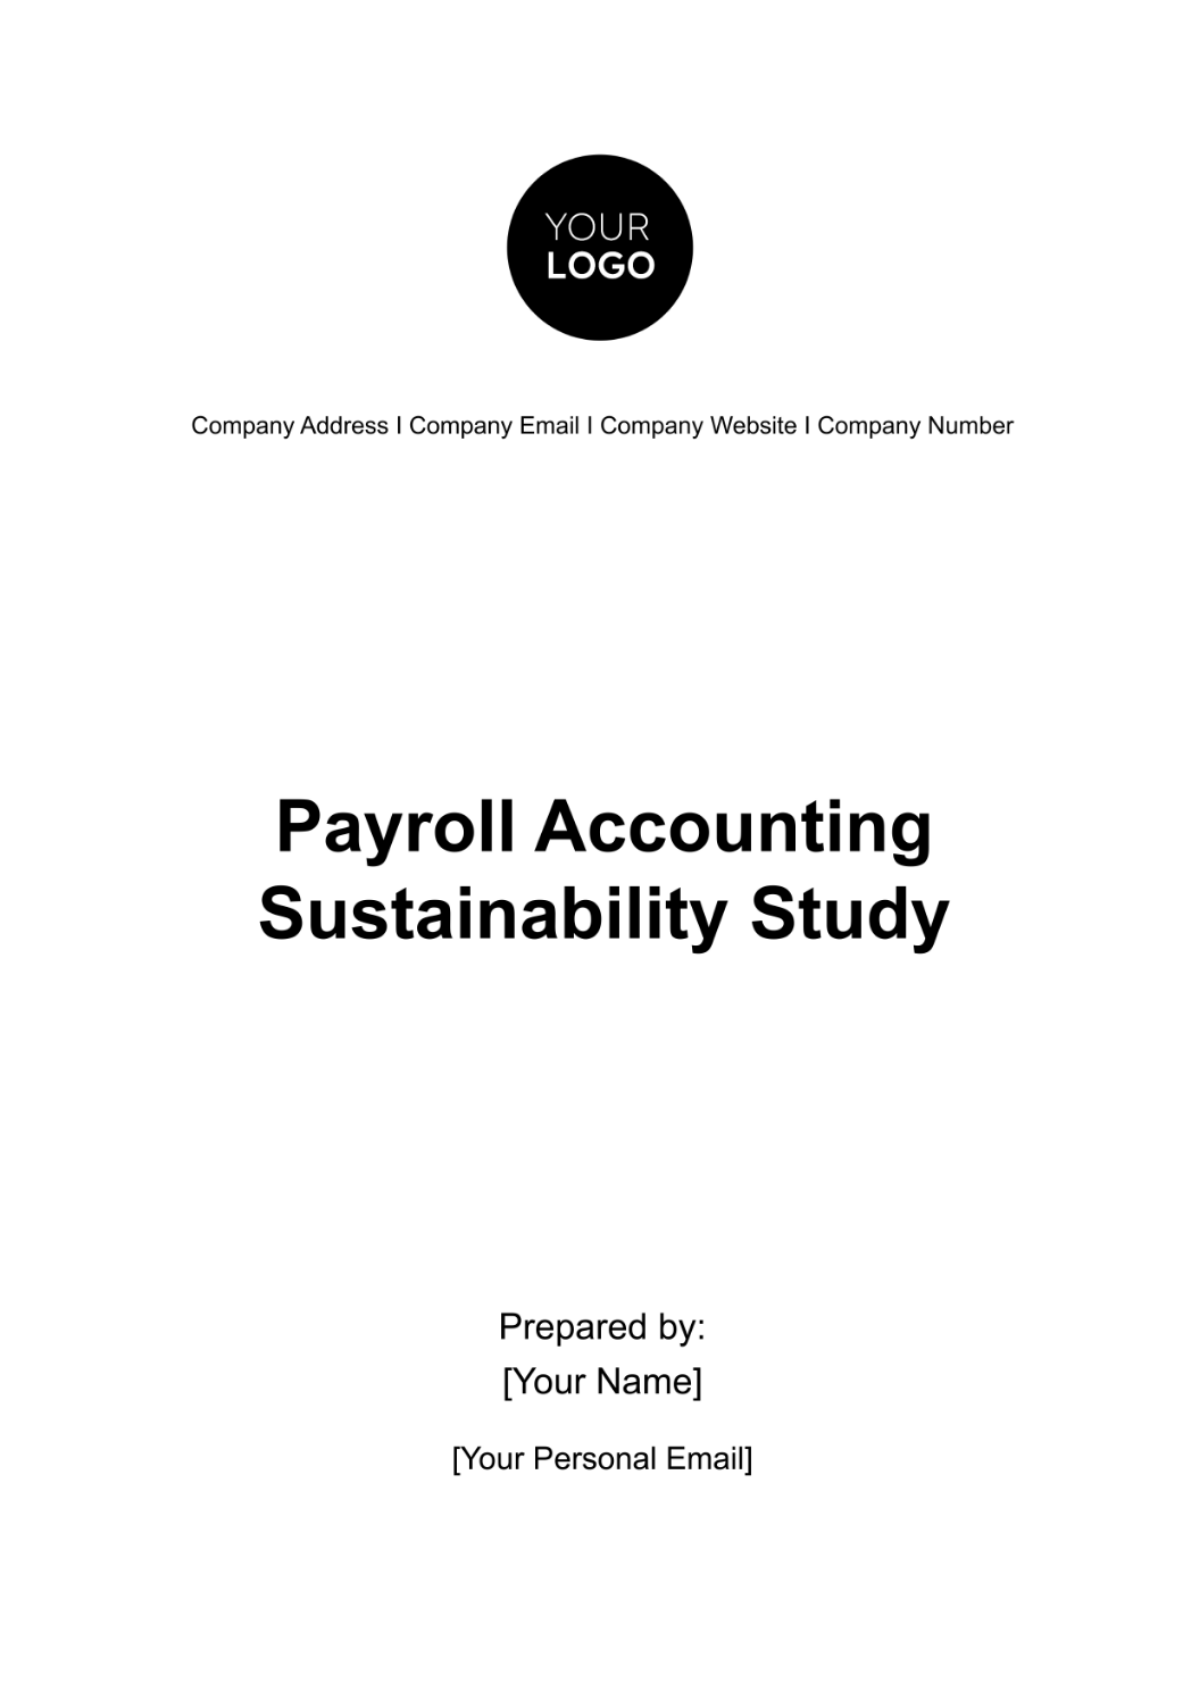 Payroll Accounting Sustainability Study Template